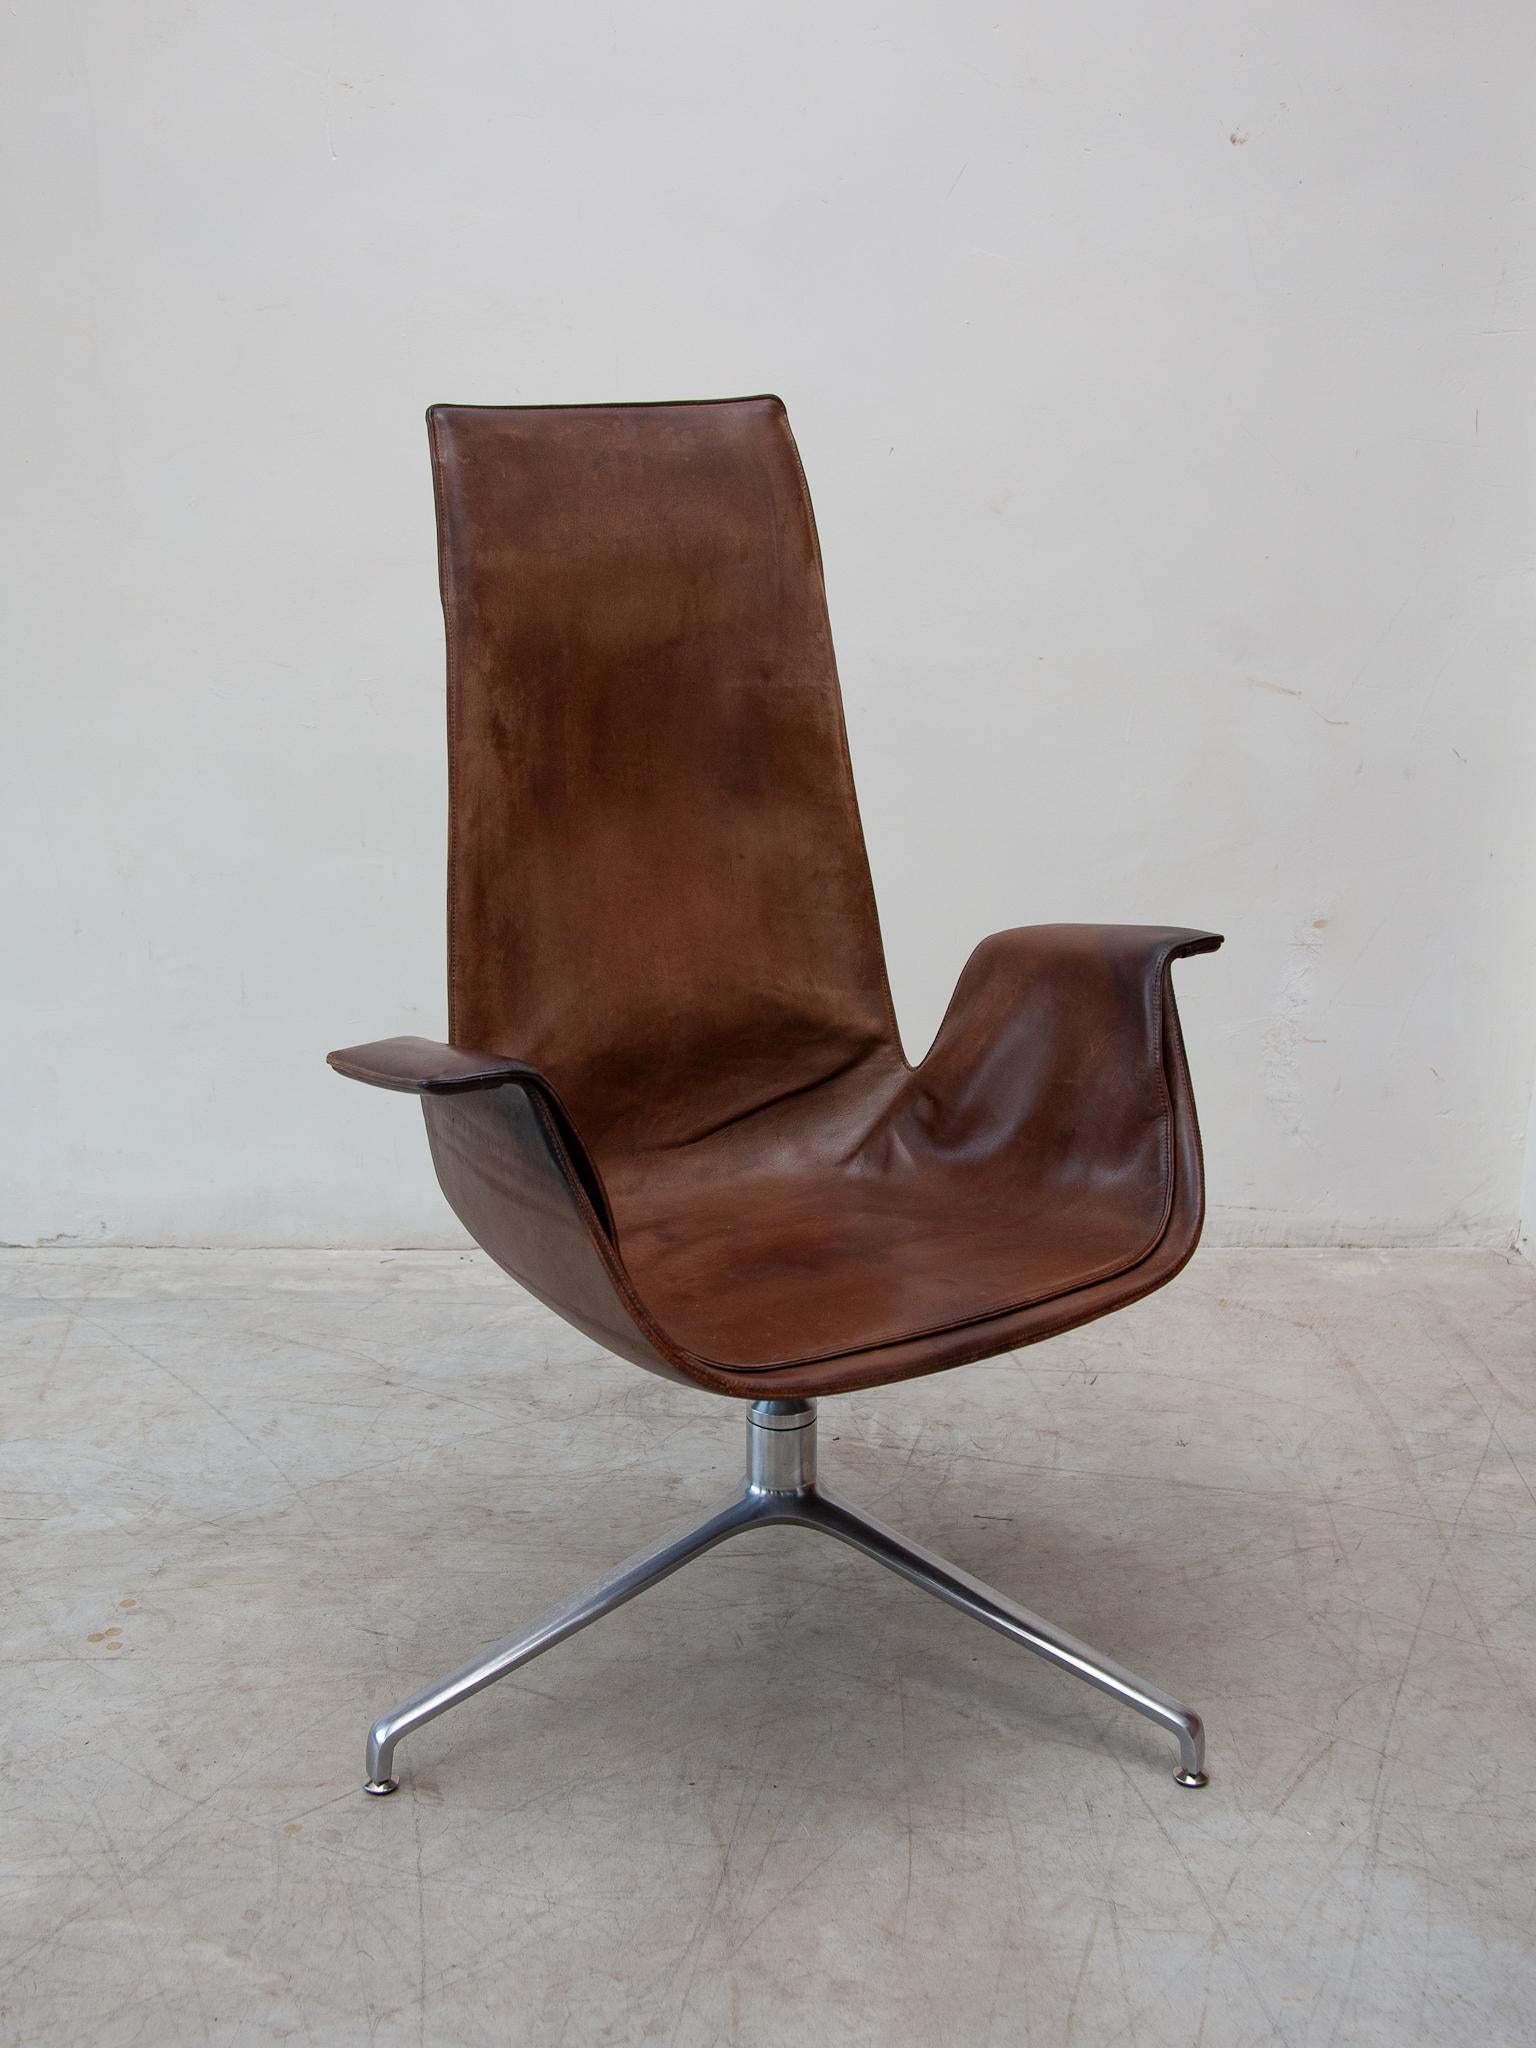 Fabricius & Kastholm FK6725 Desk, Lounge Chair in Brown Leather, Kill 8